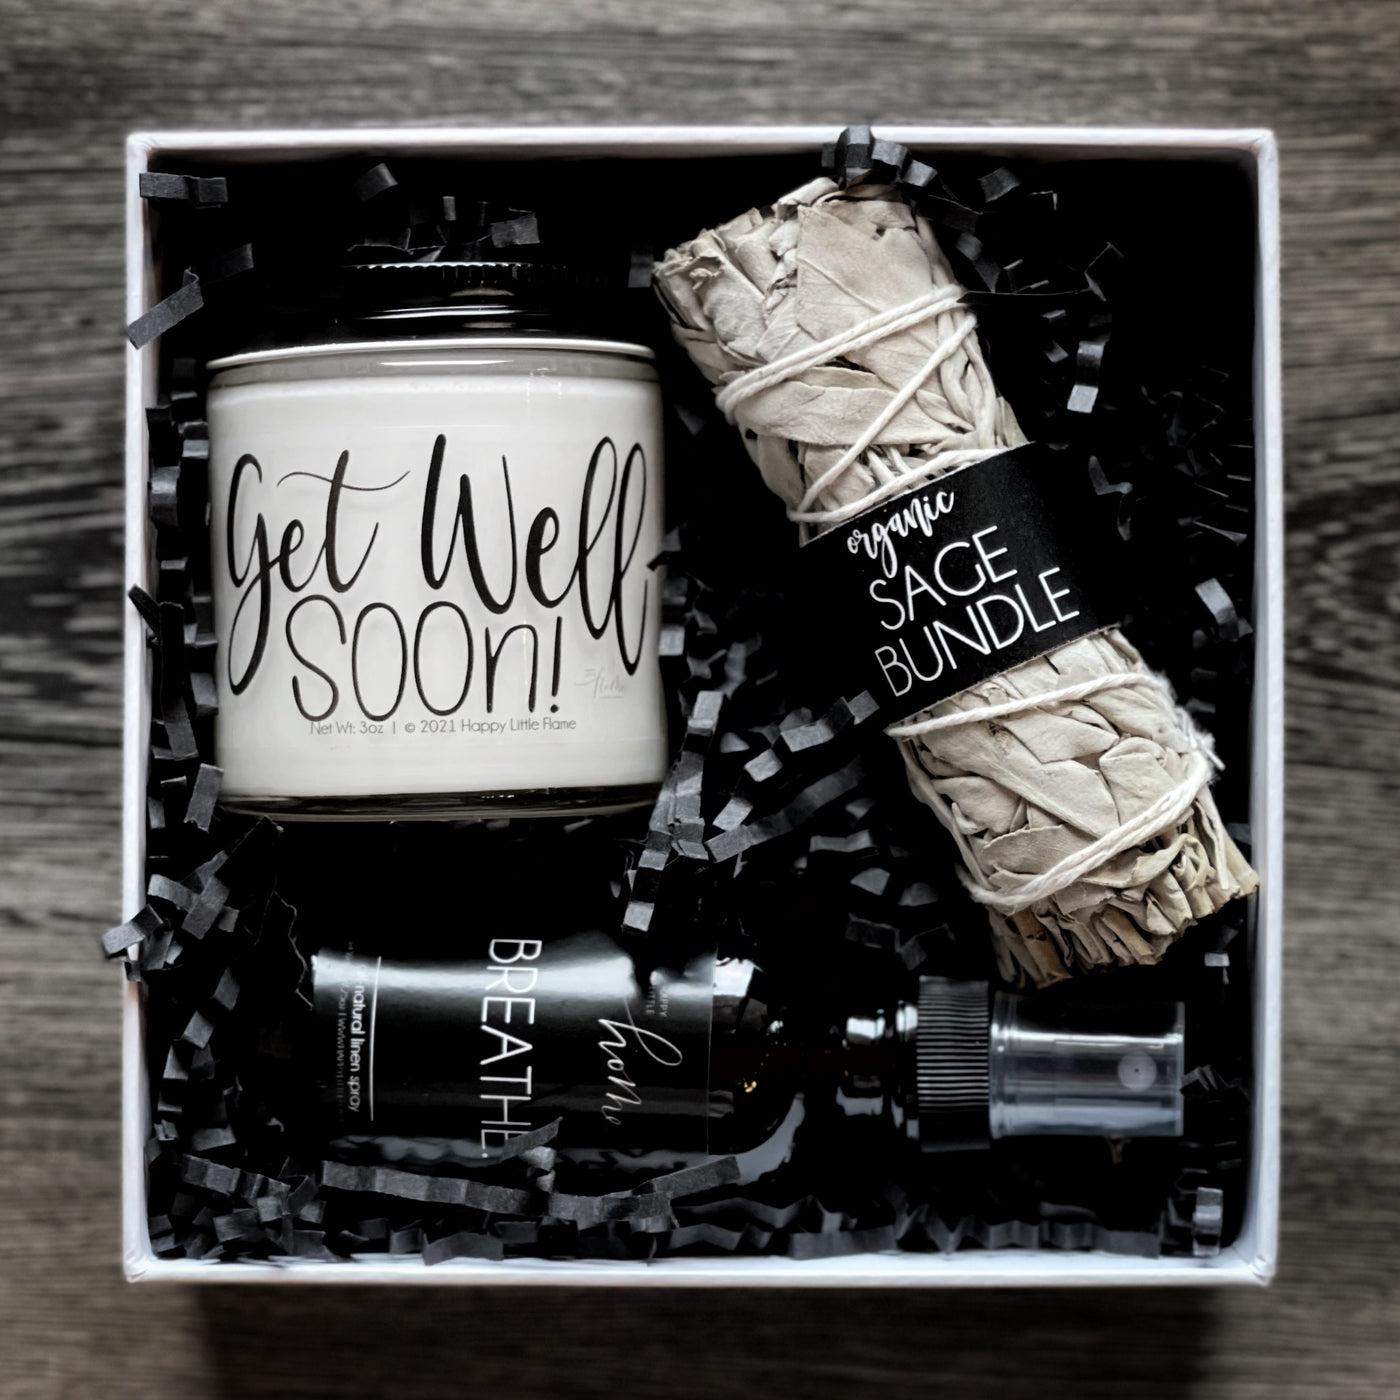 Open box of the pre-wrapped get well soon kit from Happy Little Flame which includes a white sage smudge stick , a lavender vanilla candle, and an all-natural breathe spray.